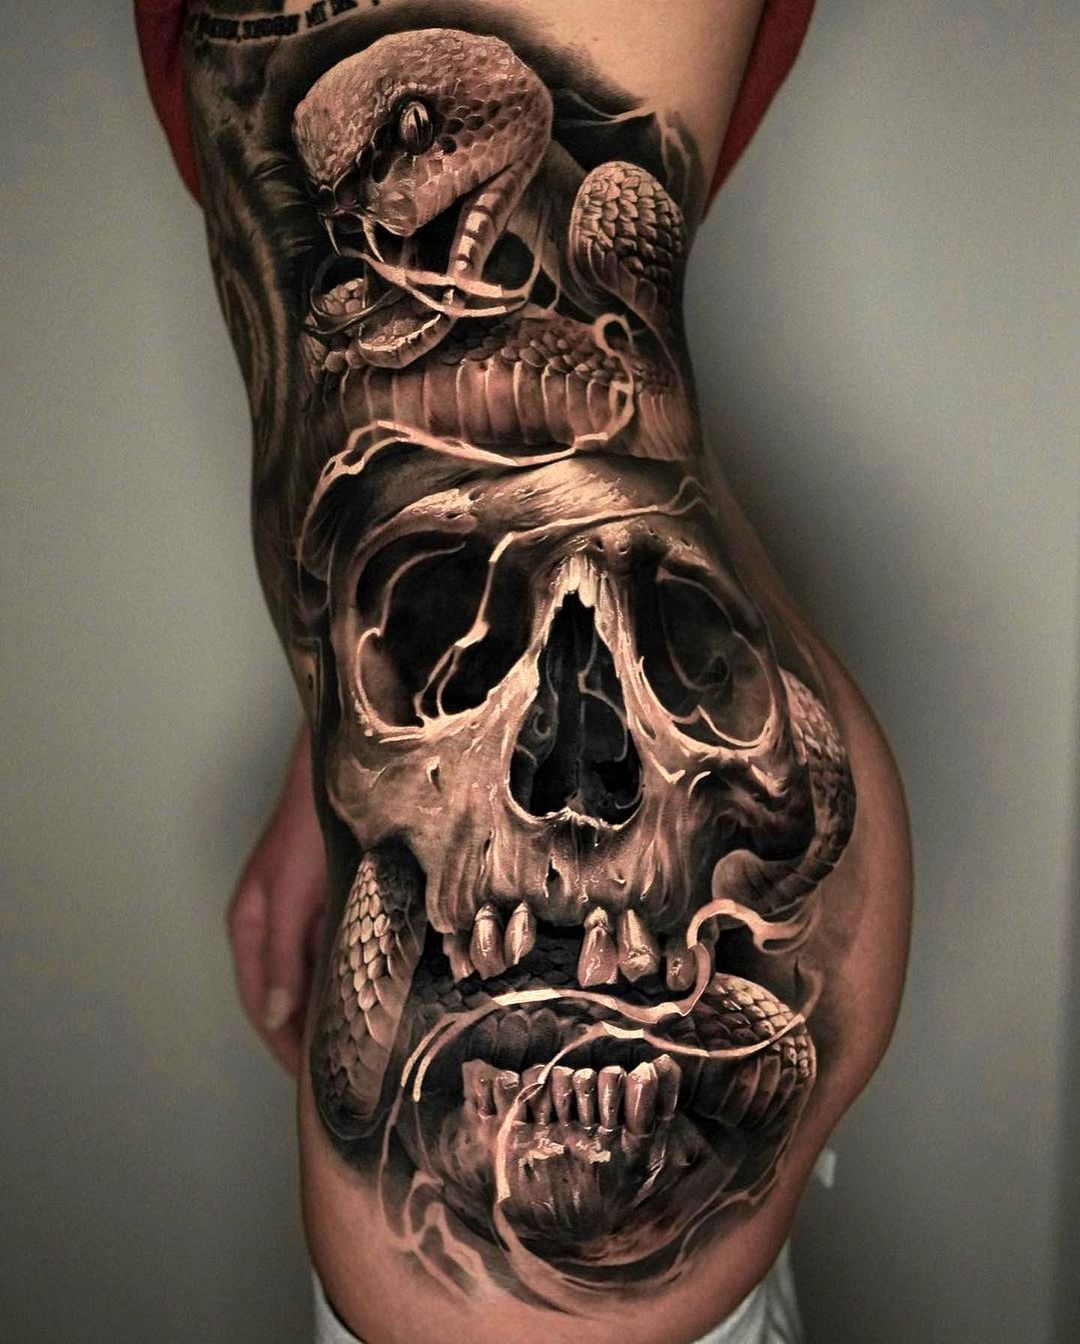 Killer Ink Tattoo on X: The Fine Art Black & Grey Set was created by Kuro  Sumi in collaboration with Pro Team artist @martamakeart & joins the new  #REACH compliant Imperial range.